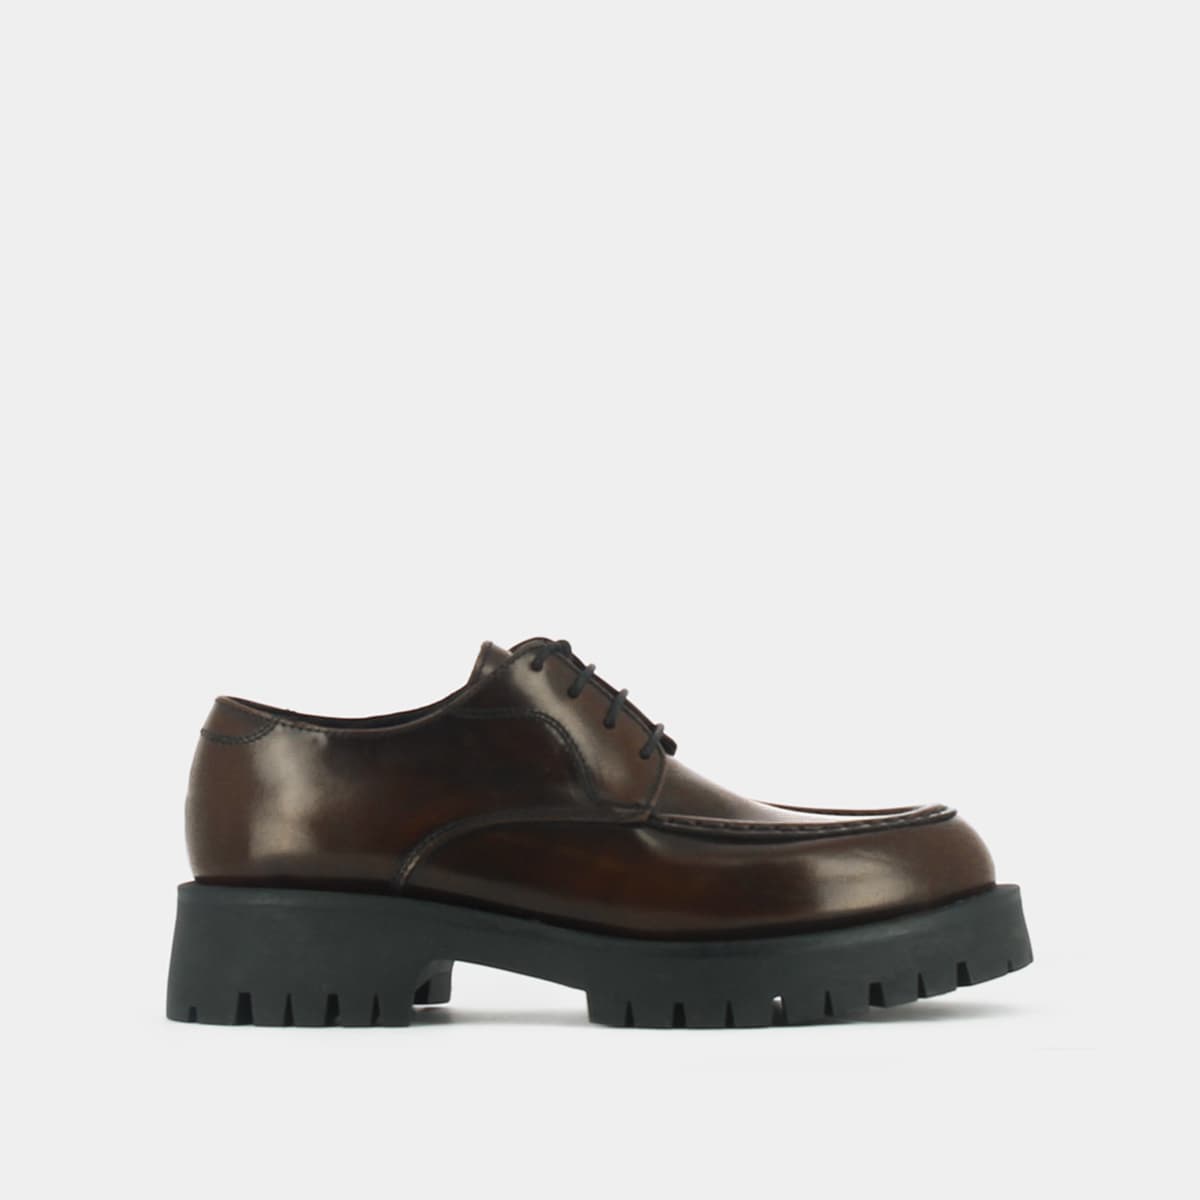 Derbies with laces and notched sole in brown glazed leather